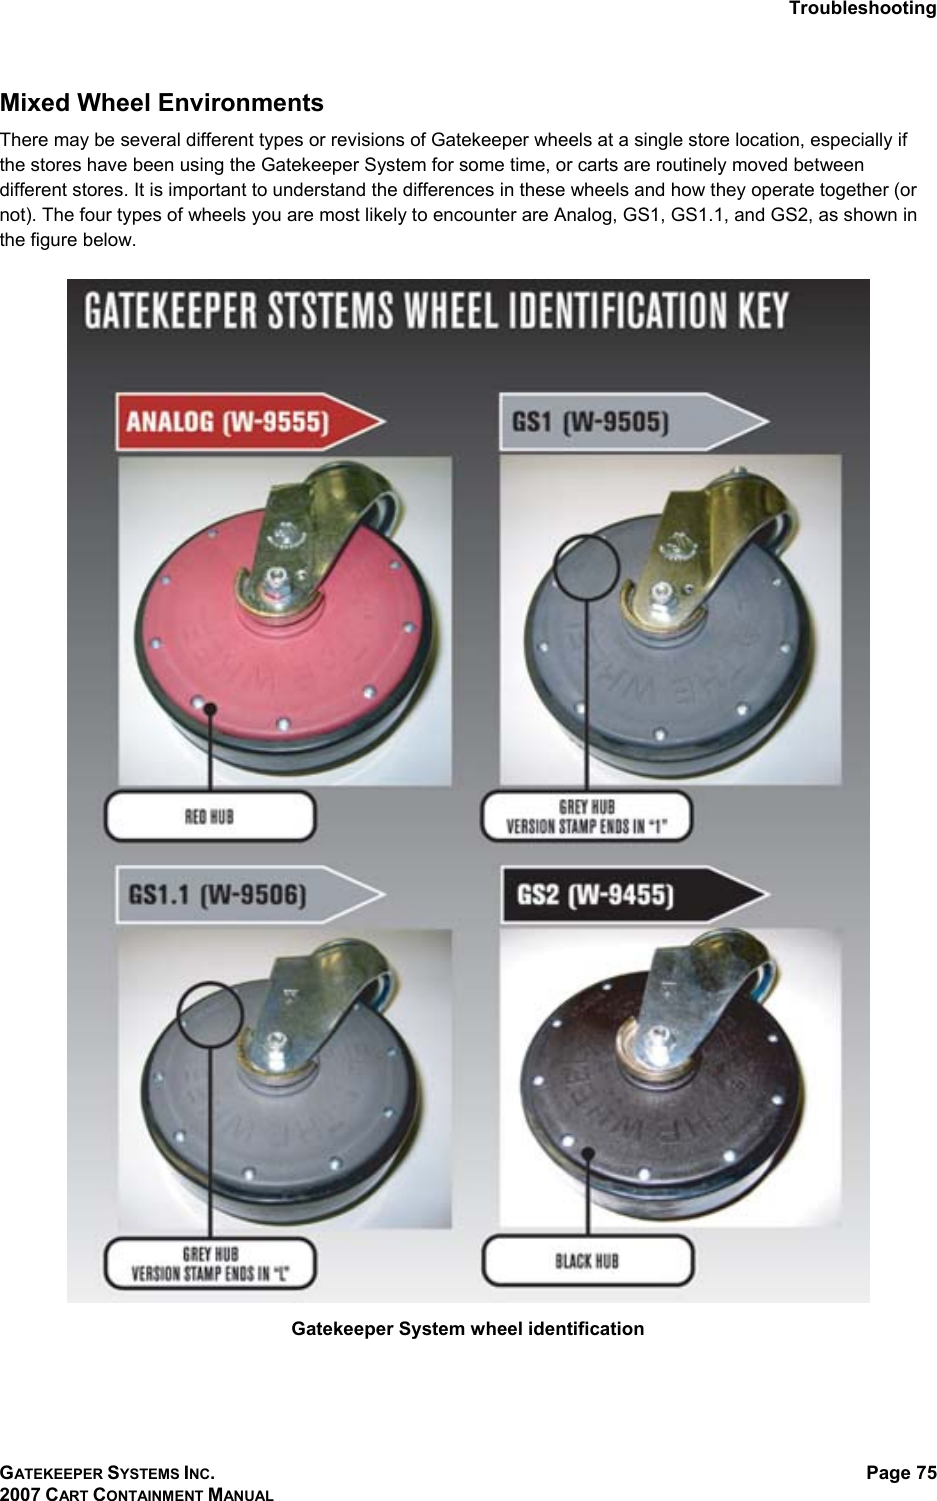 Troubleshooting GATEKEEPER SYSTEMS INC. 2007 CART CONTAINMENT MANUAL Page 75  Mixed Wheel Environments There may be several different types or revisions of Gatekeeper wheels at a single store location, especially if the stores have been using the Gatekeeper System for some time, or carts are routinely moved between different stores. It is important to understand the differences in these wheels and how they operate together (or not). The four types of wheels you are most likely to encounter are Analog, GS1, GS1.1, and GS2, as shown in the figure below.    Gatekeeper System wheel identification 